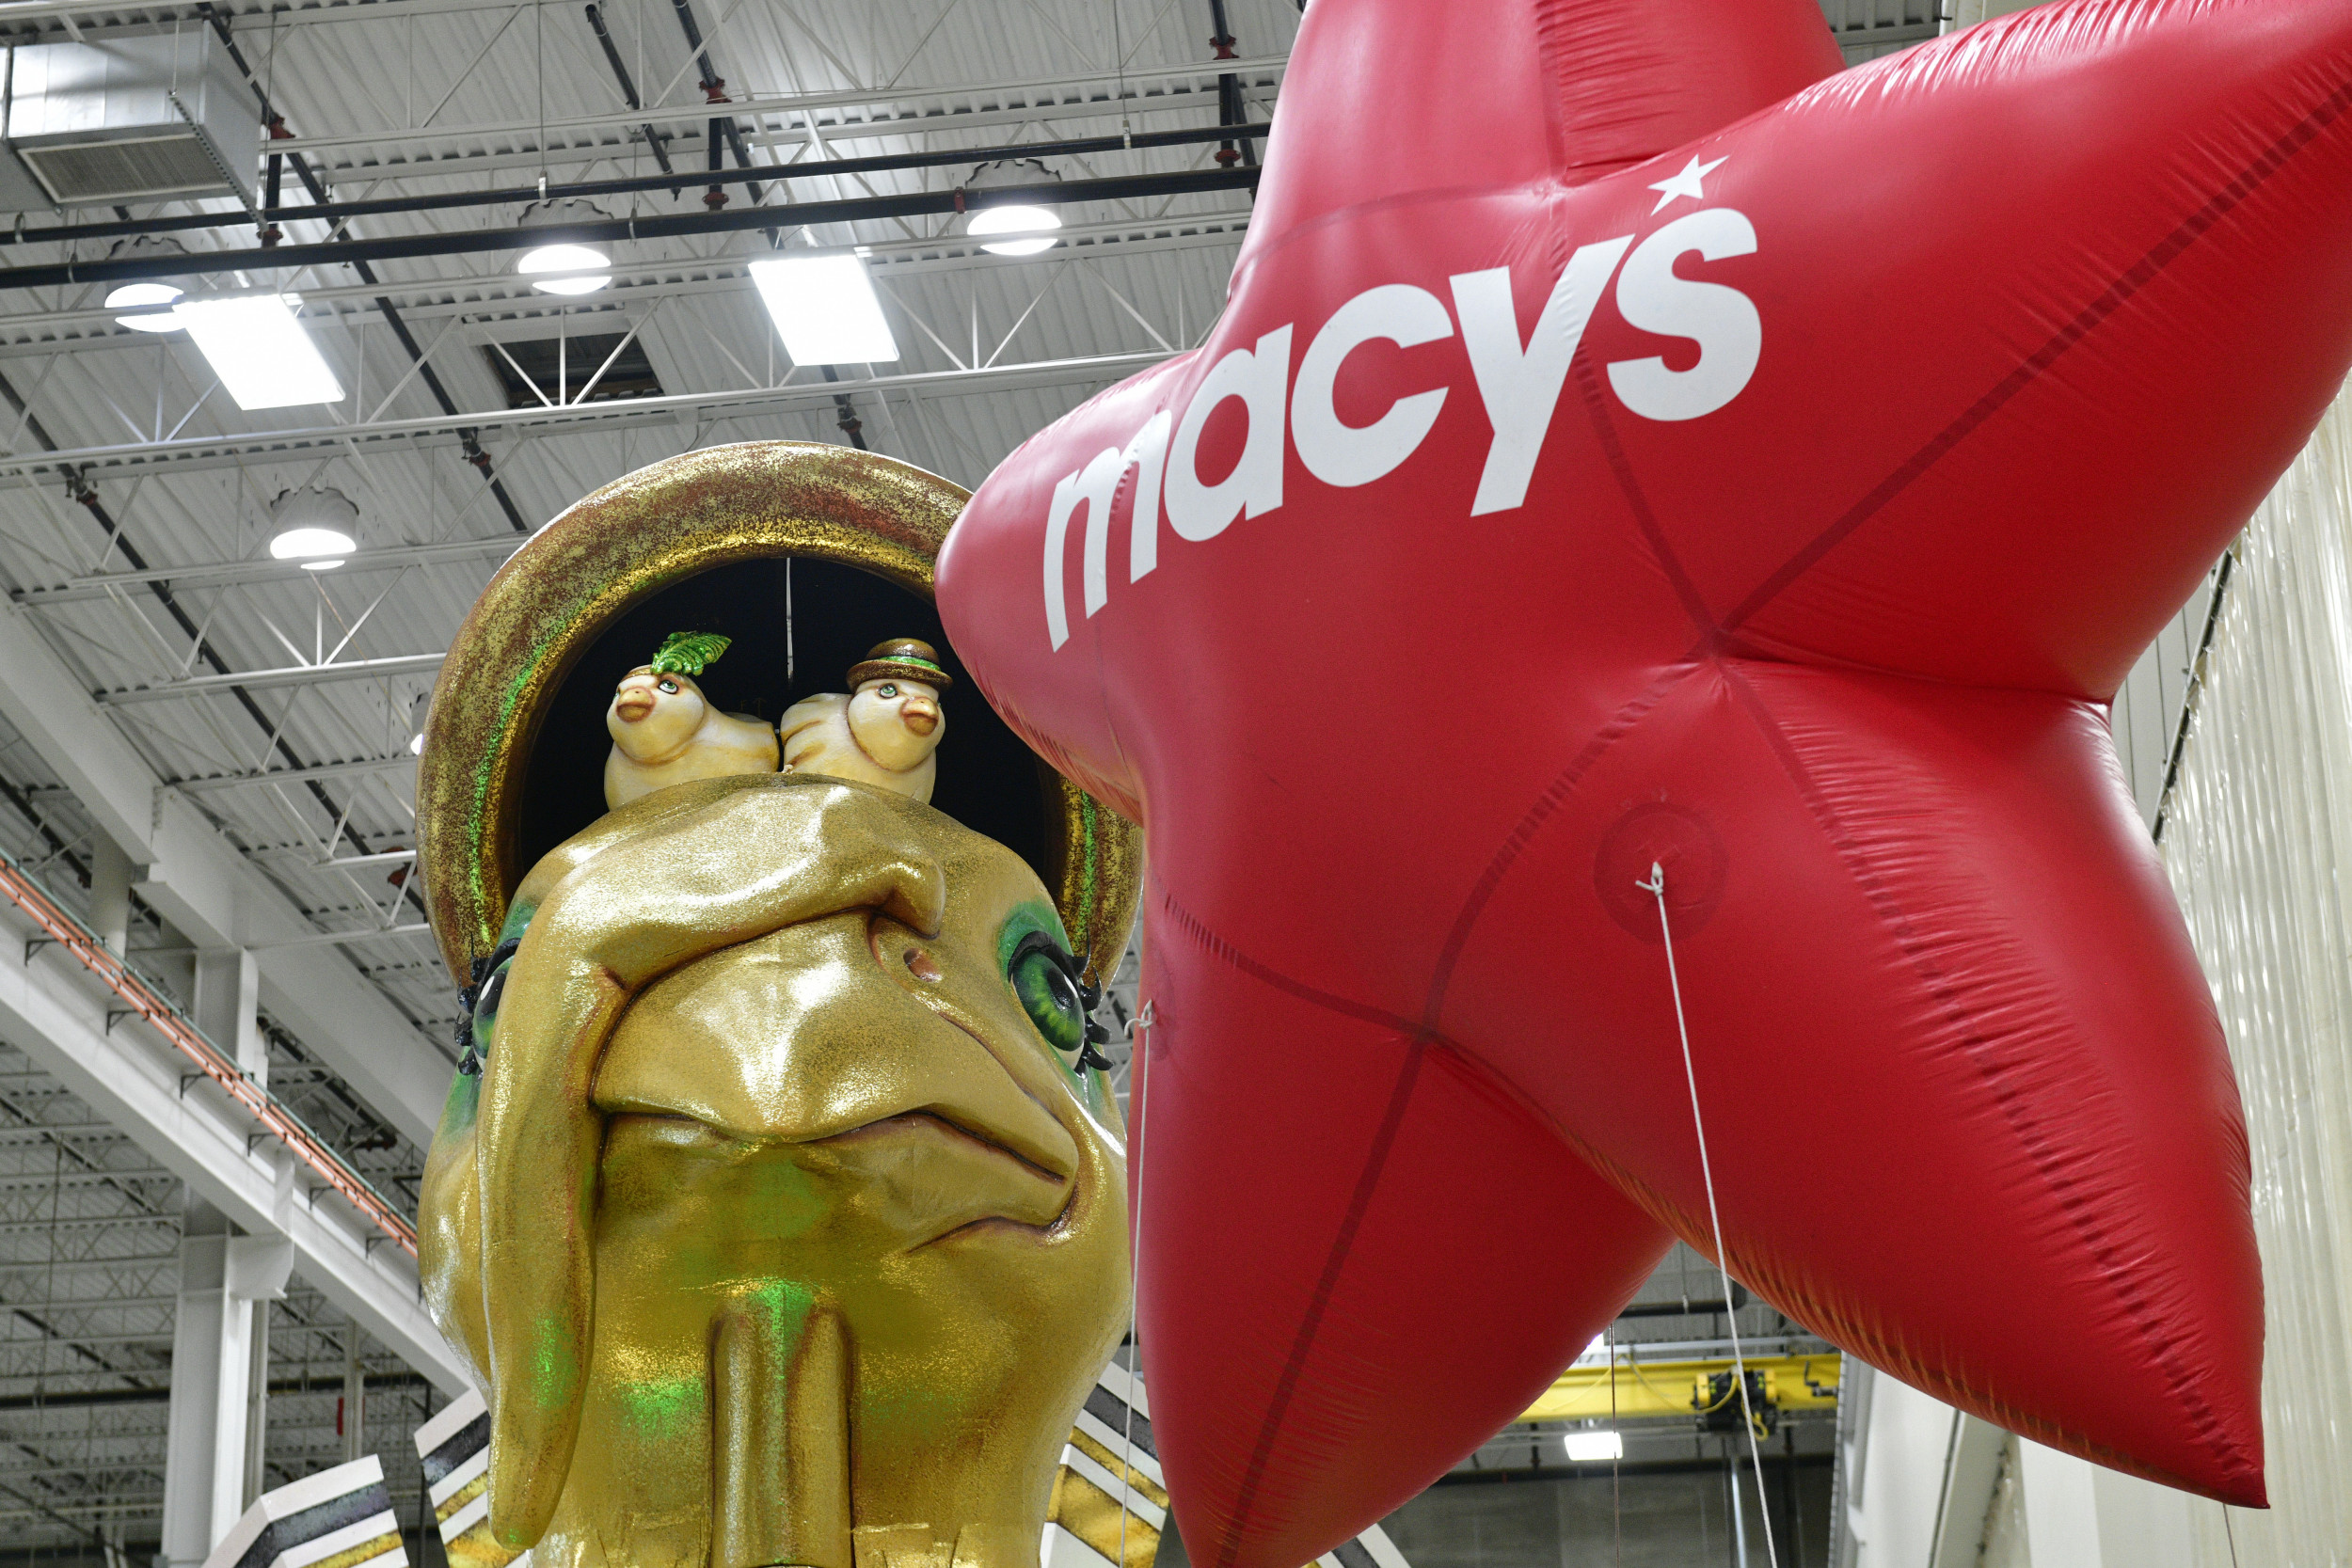 Macys Thanksgiving Day Parade 2020 How to Watch, Live Stream